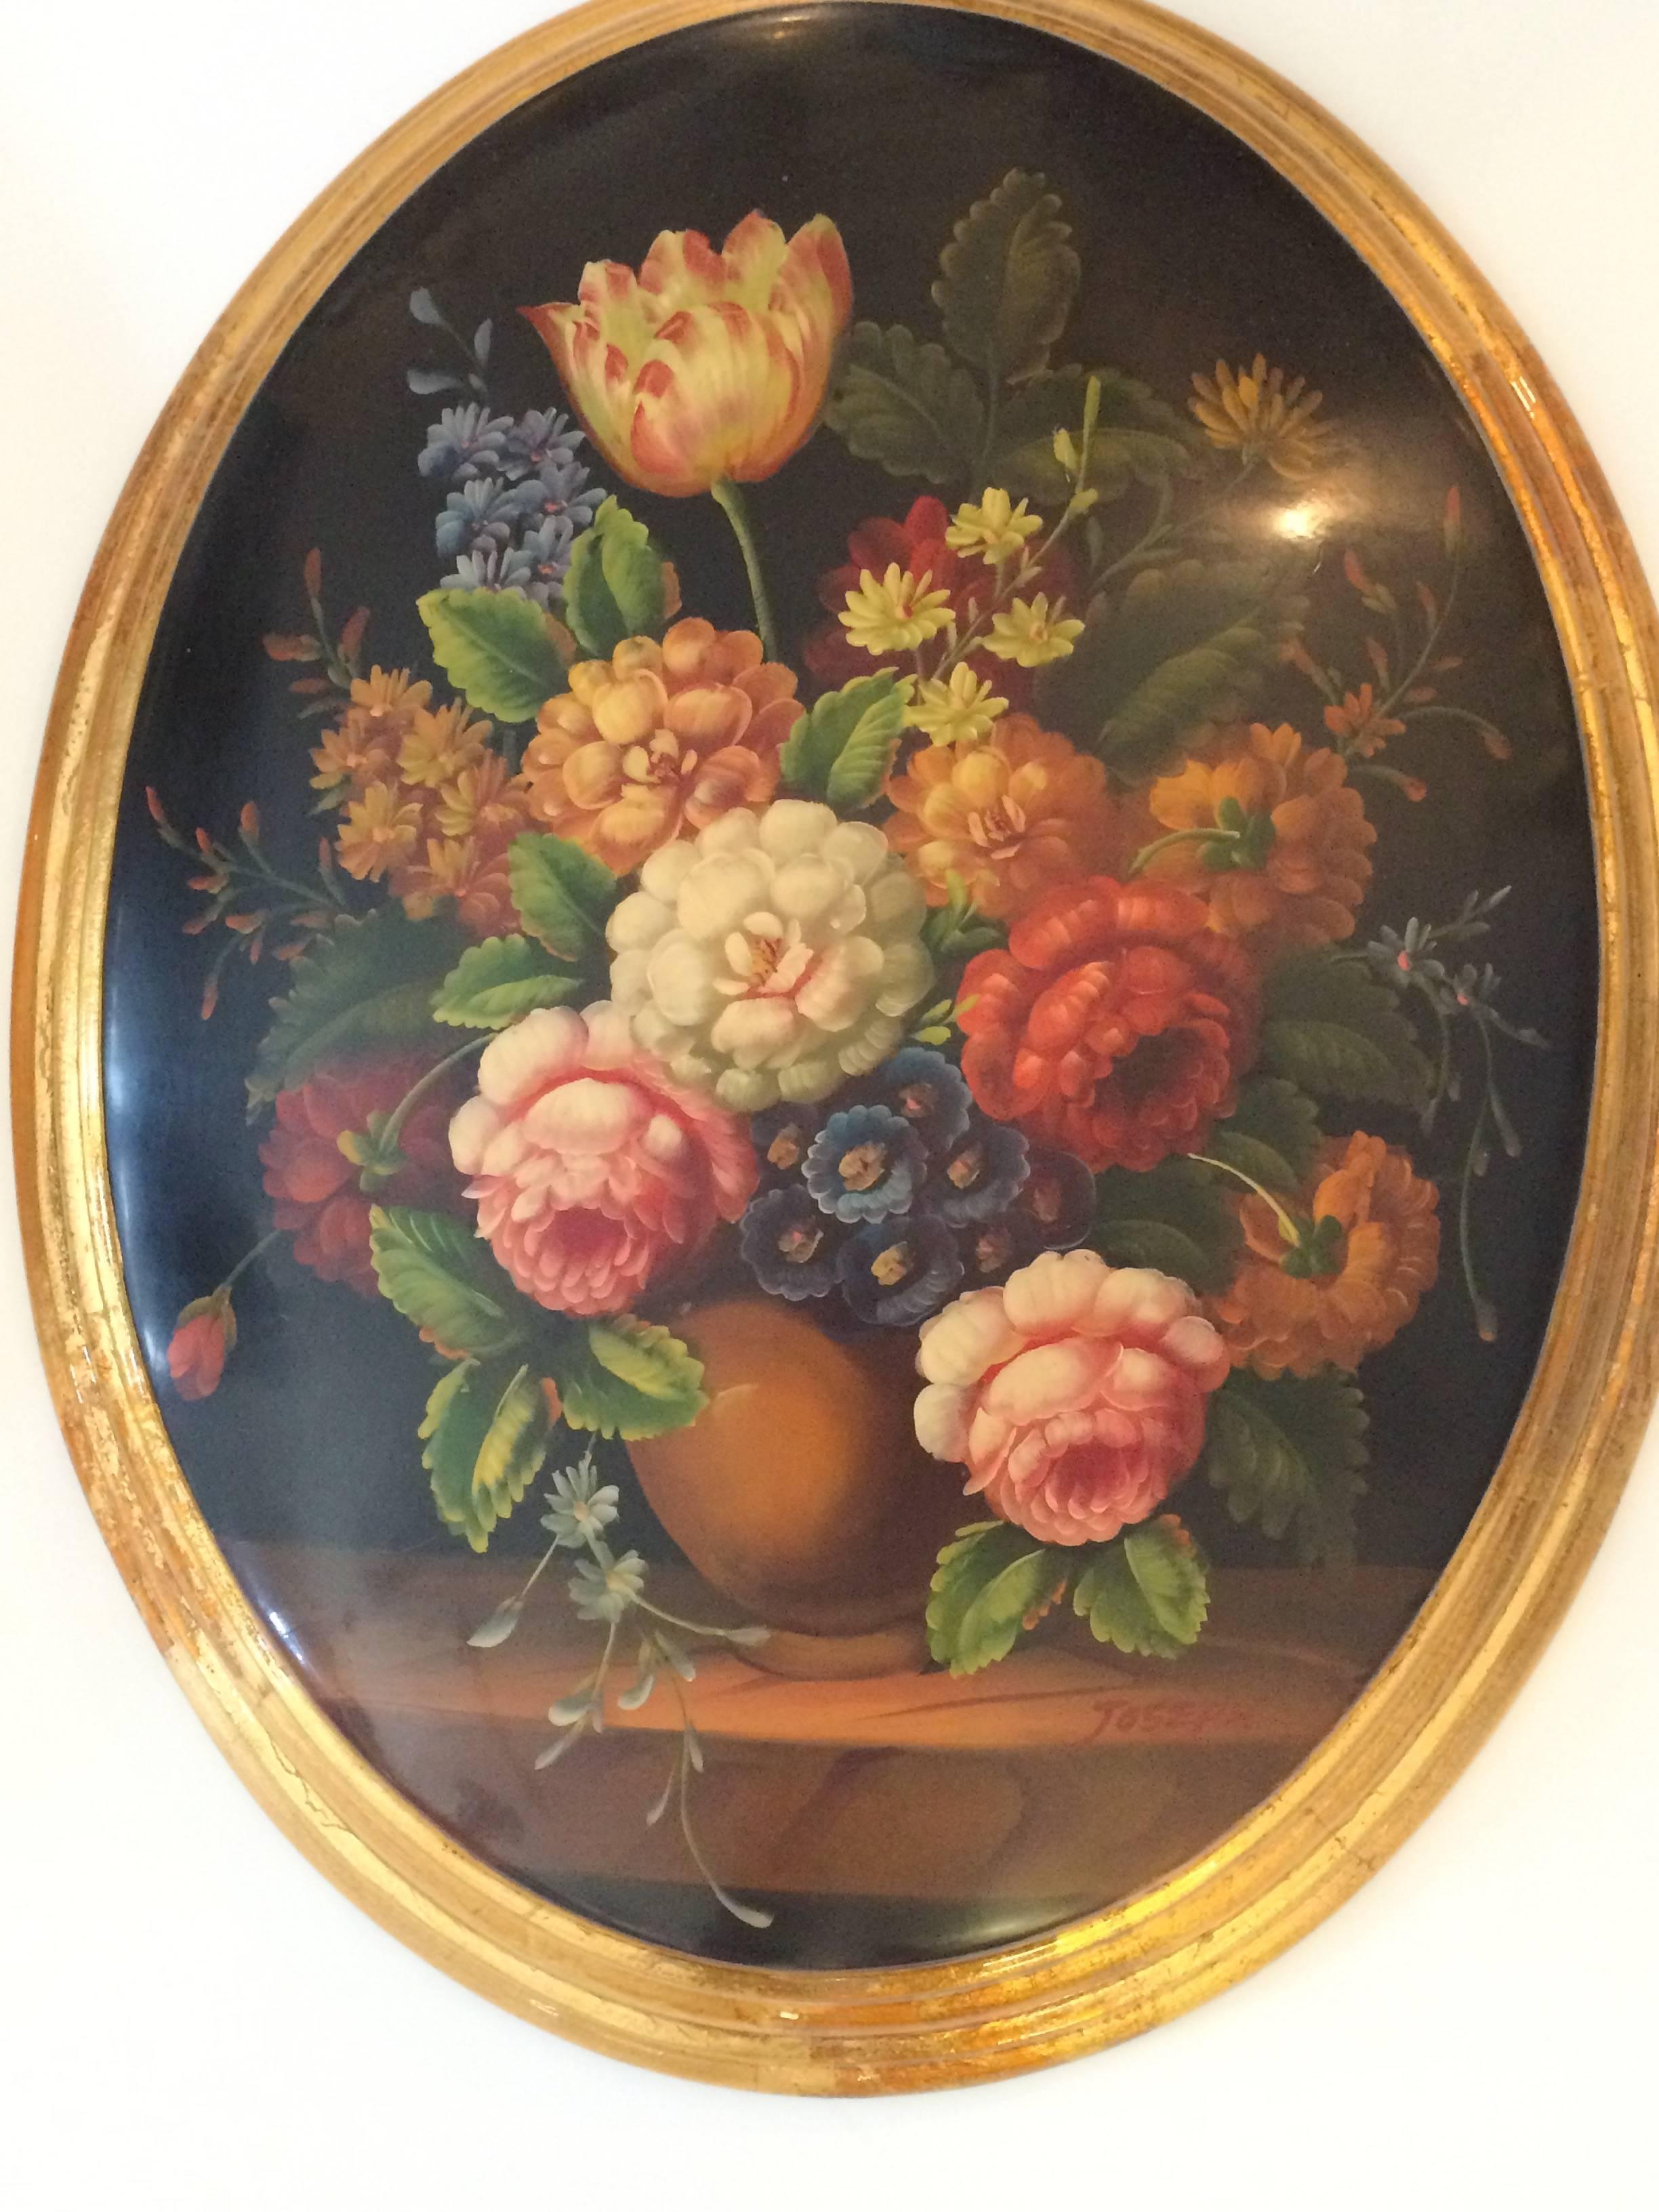 Old world charming floral still life paintings rendered on oval convex wood, lacquered and framed in gilded moldings. Decorative bow hangers are included.